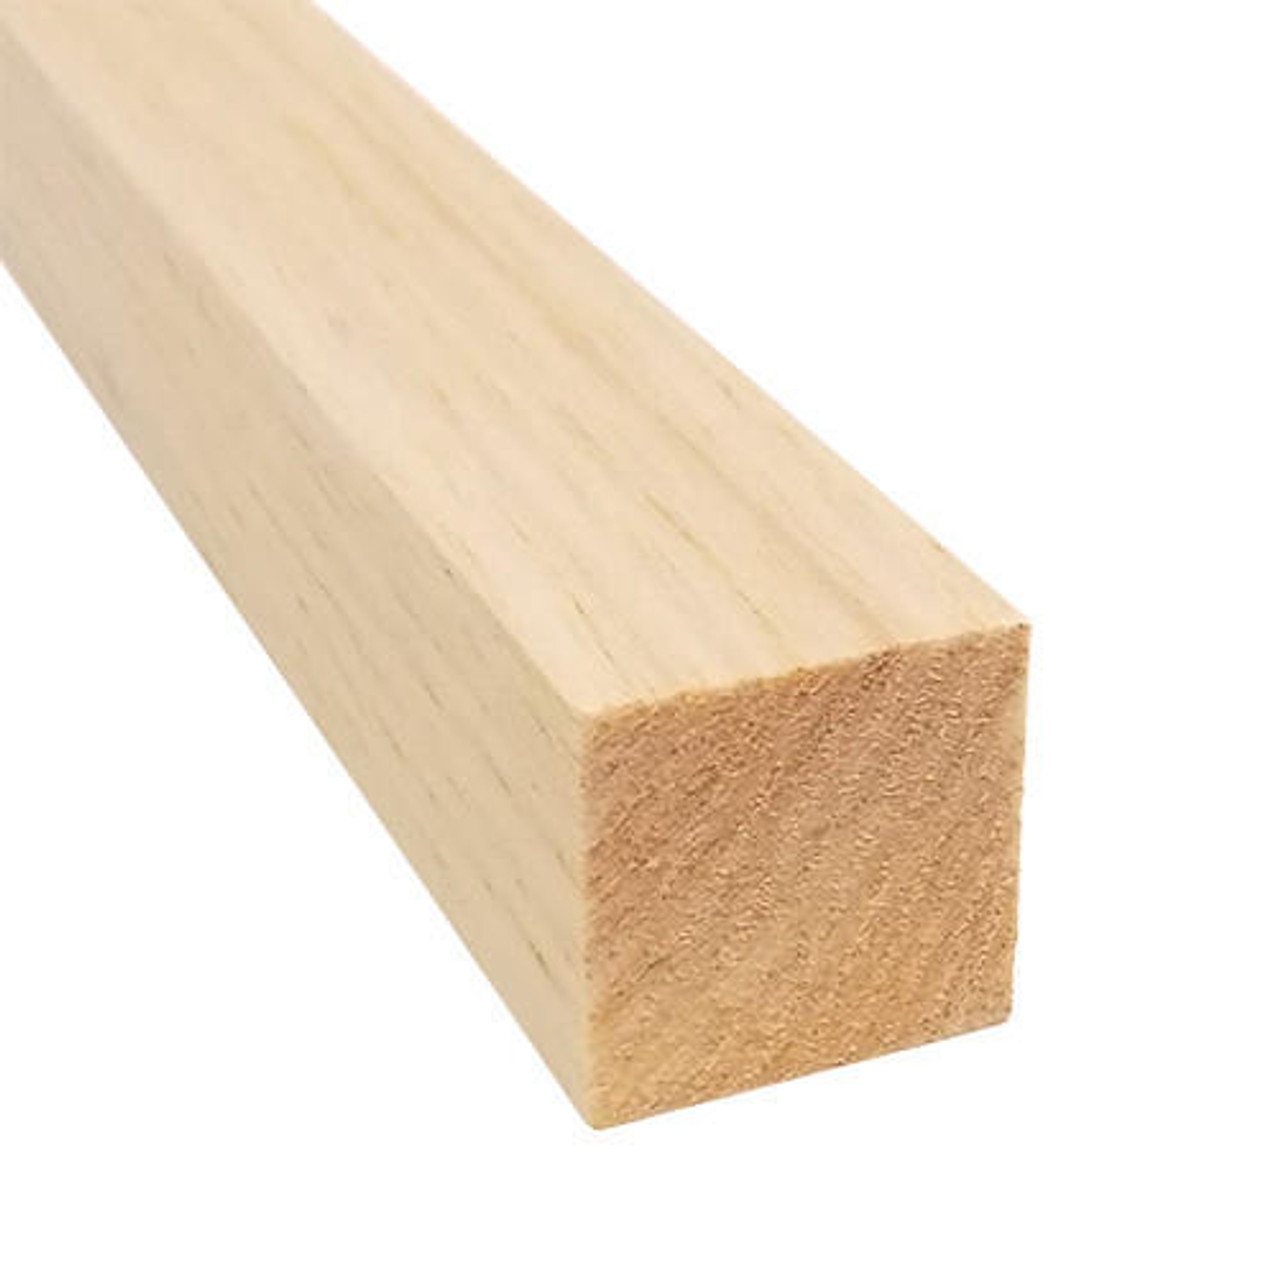 Midwest Products Balsa Wood Sheet